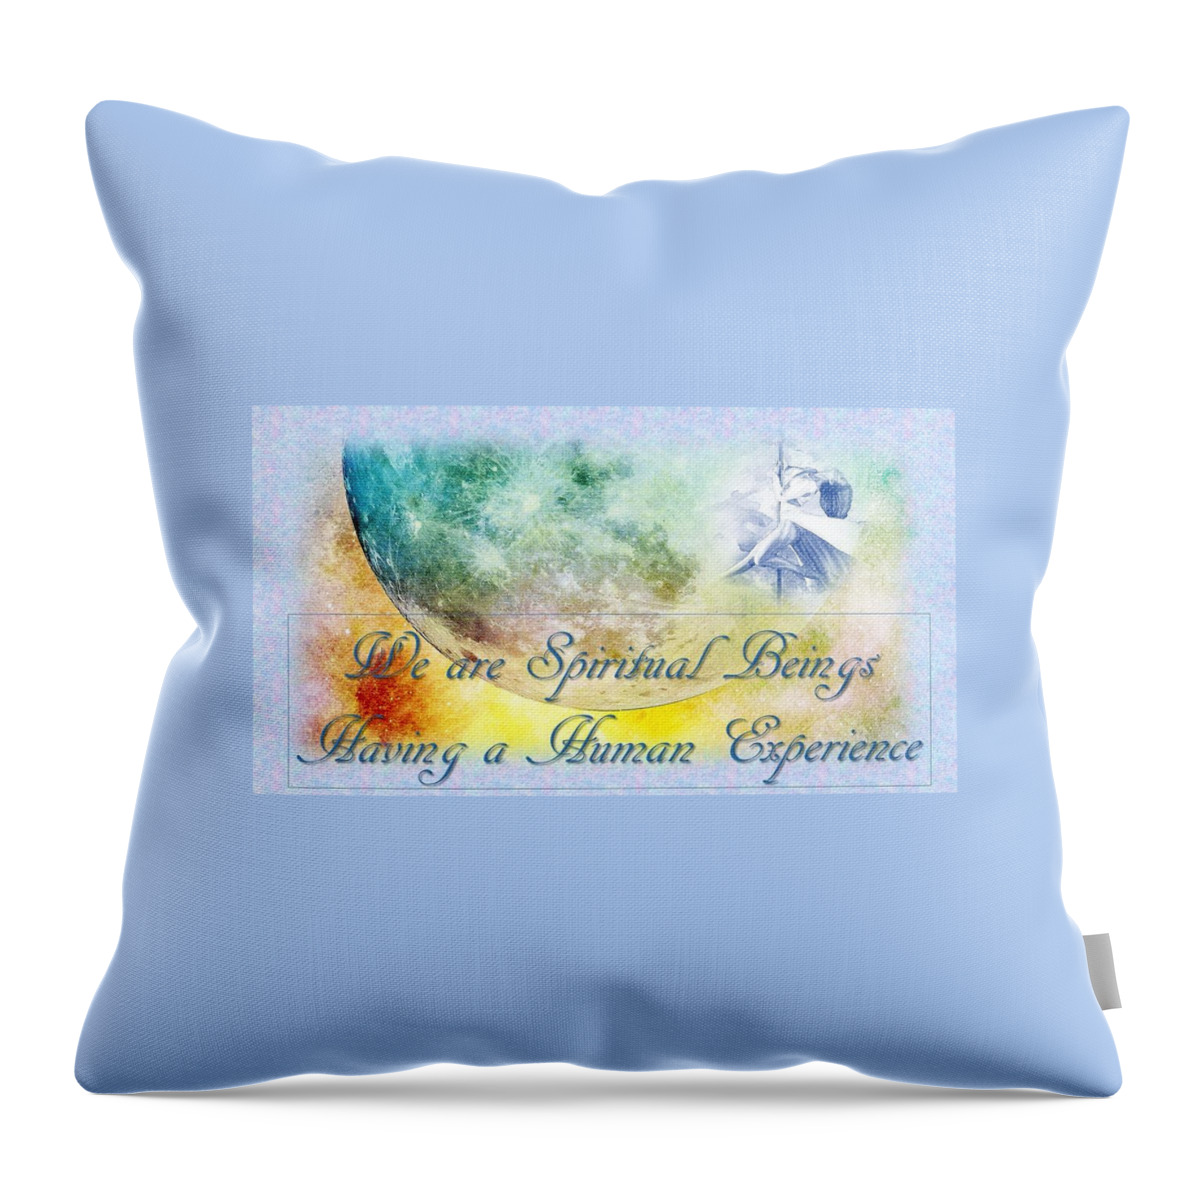 Moon Throw Pillow featuring the mixed media We Are Spiritual Beings by Nancy Ayanna Wyatt